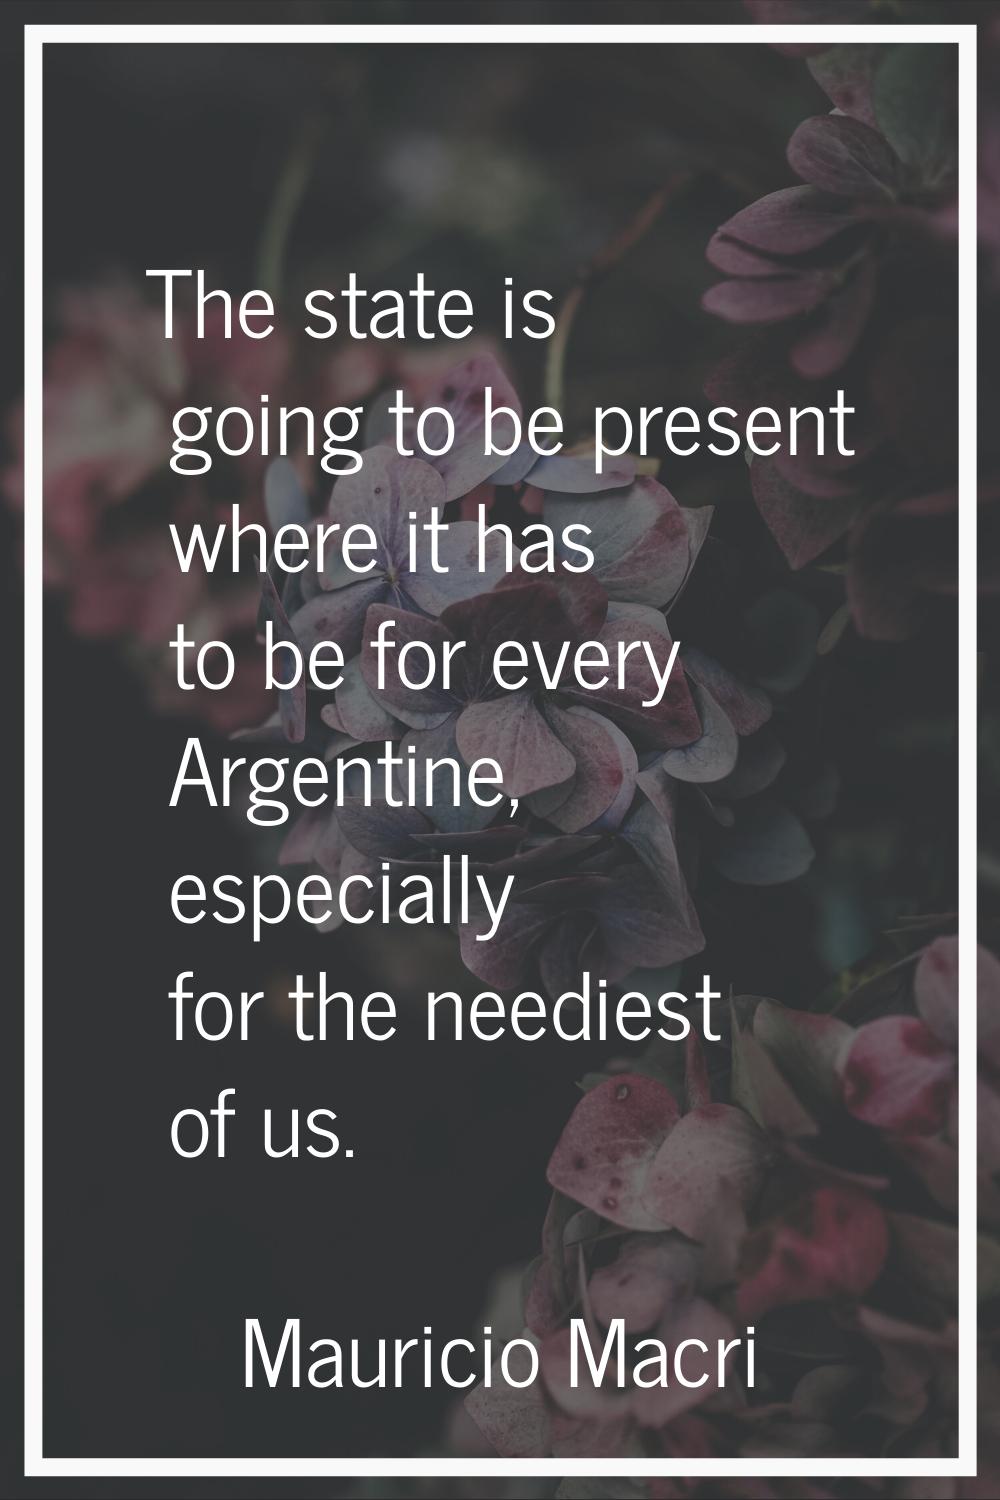 The state is going to be present where it has to be for every Argentine, especially for the needies